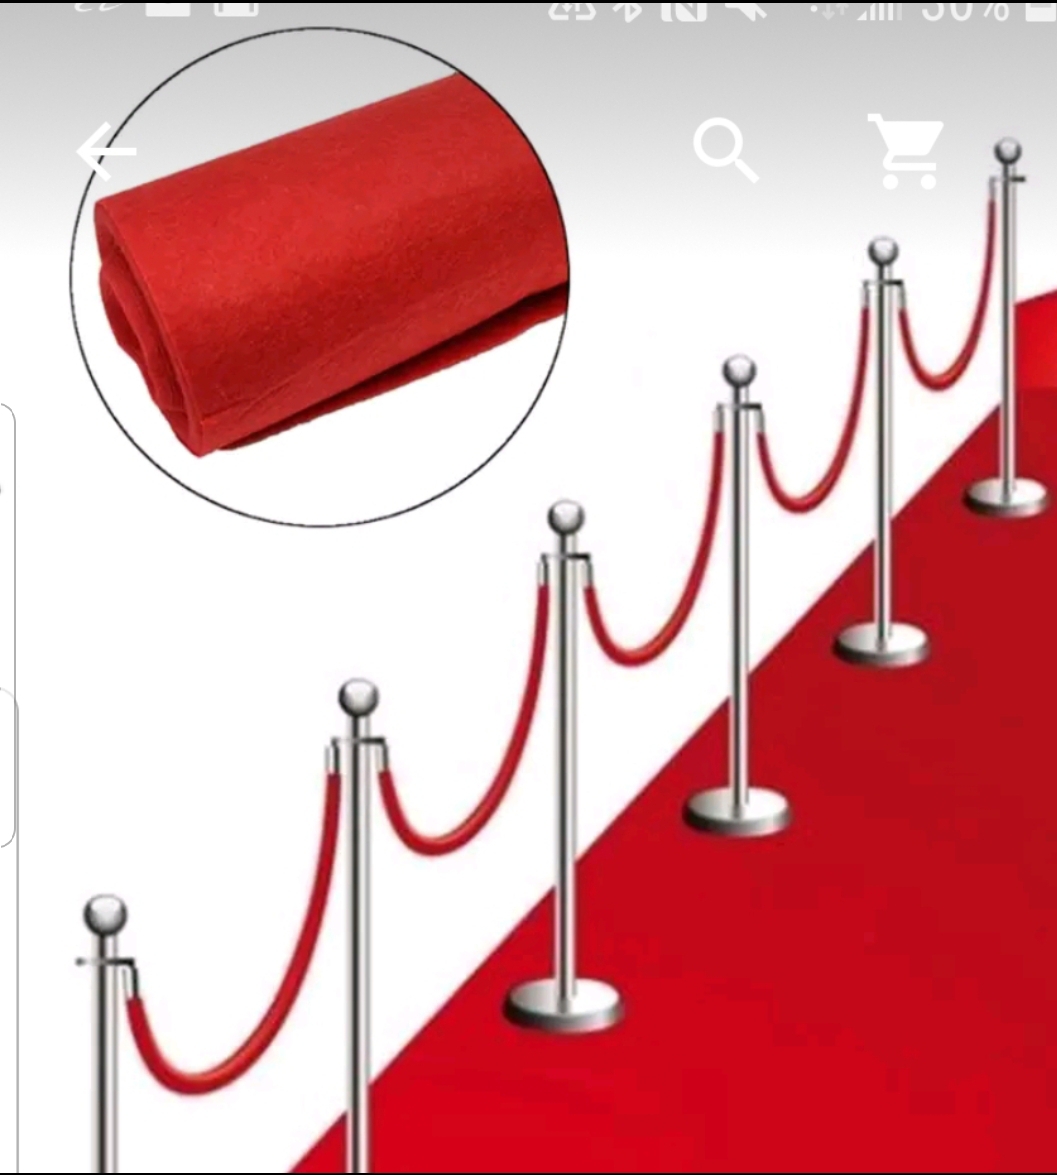 Red carpet with poles and rope $200/day